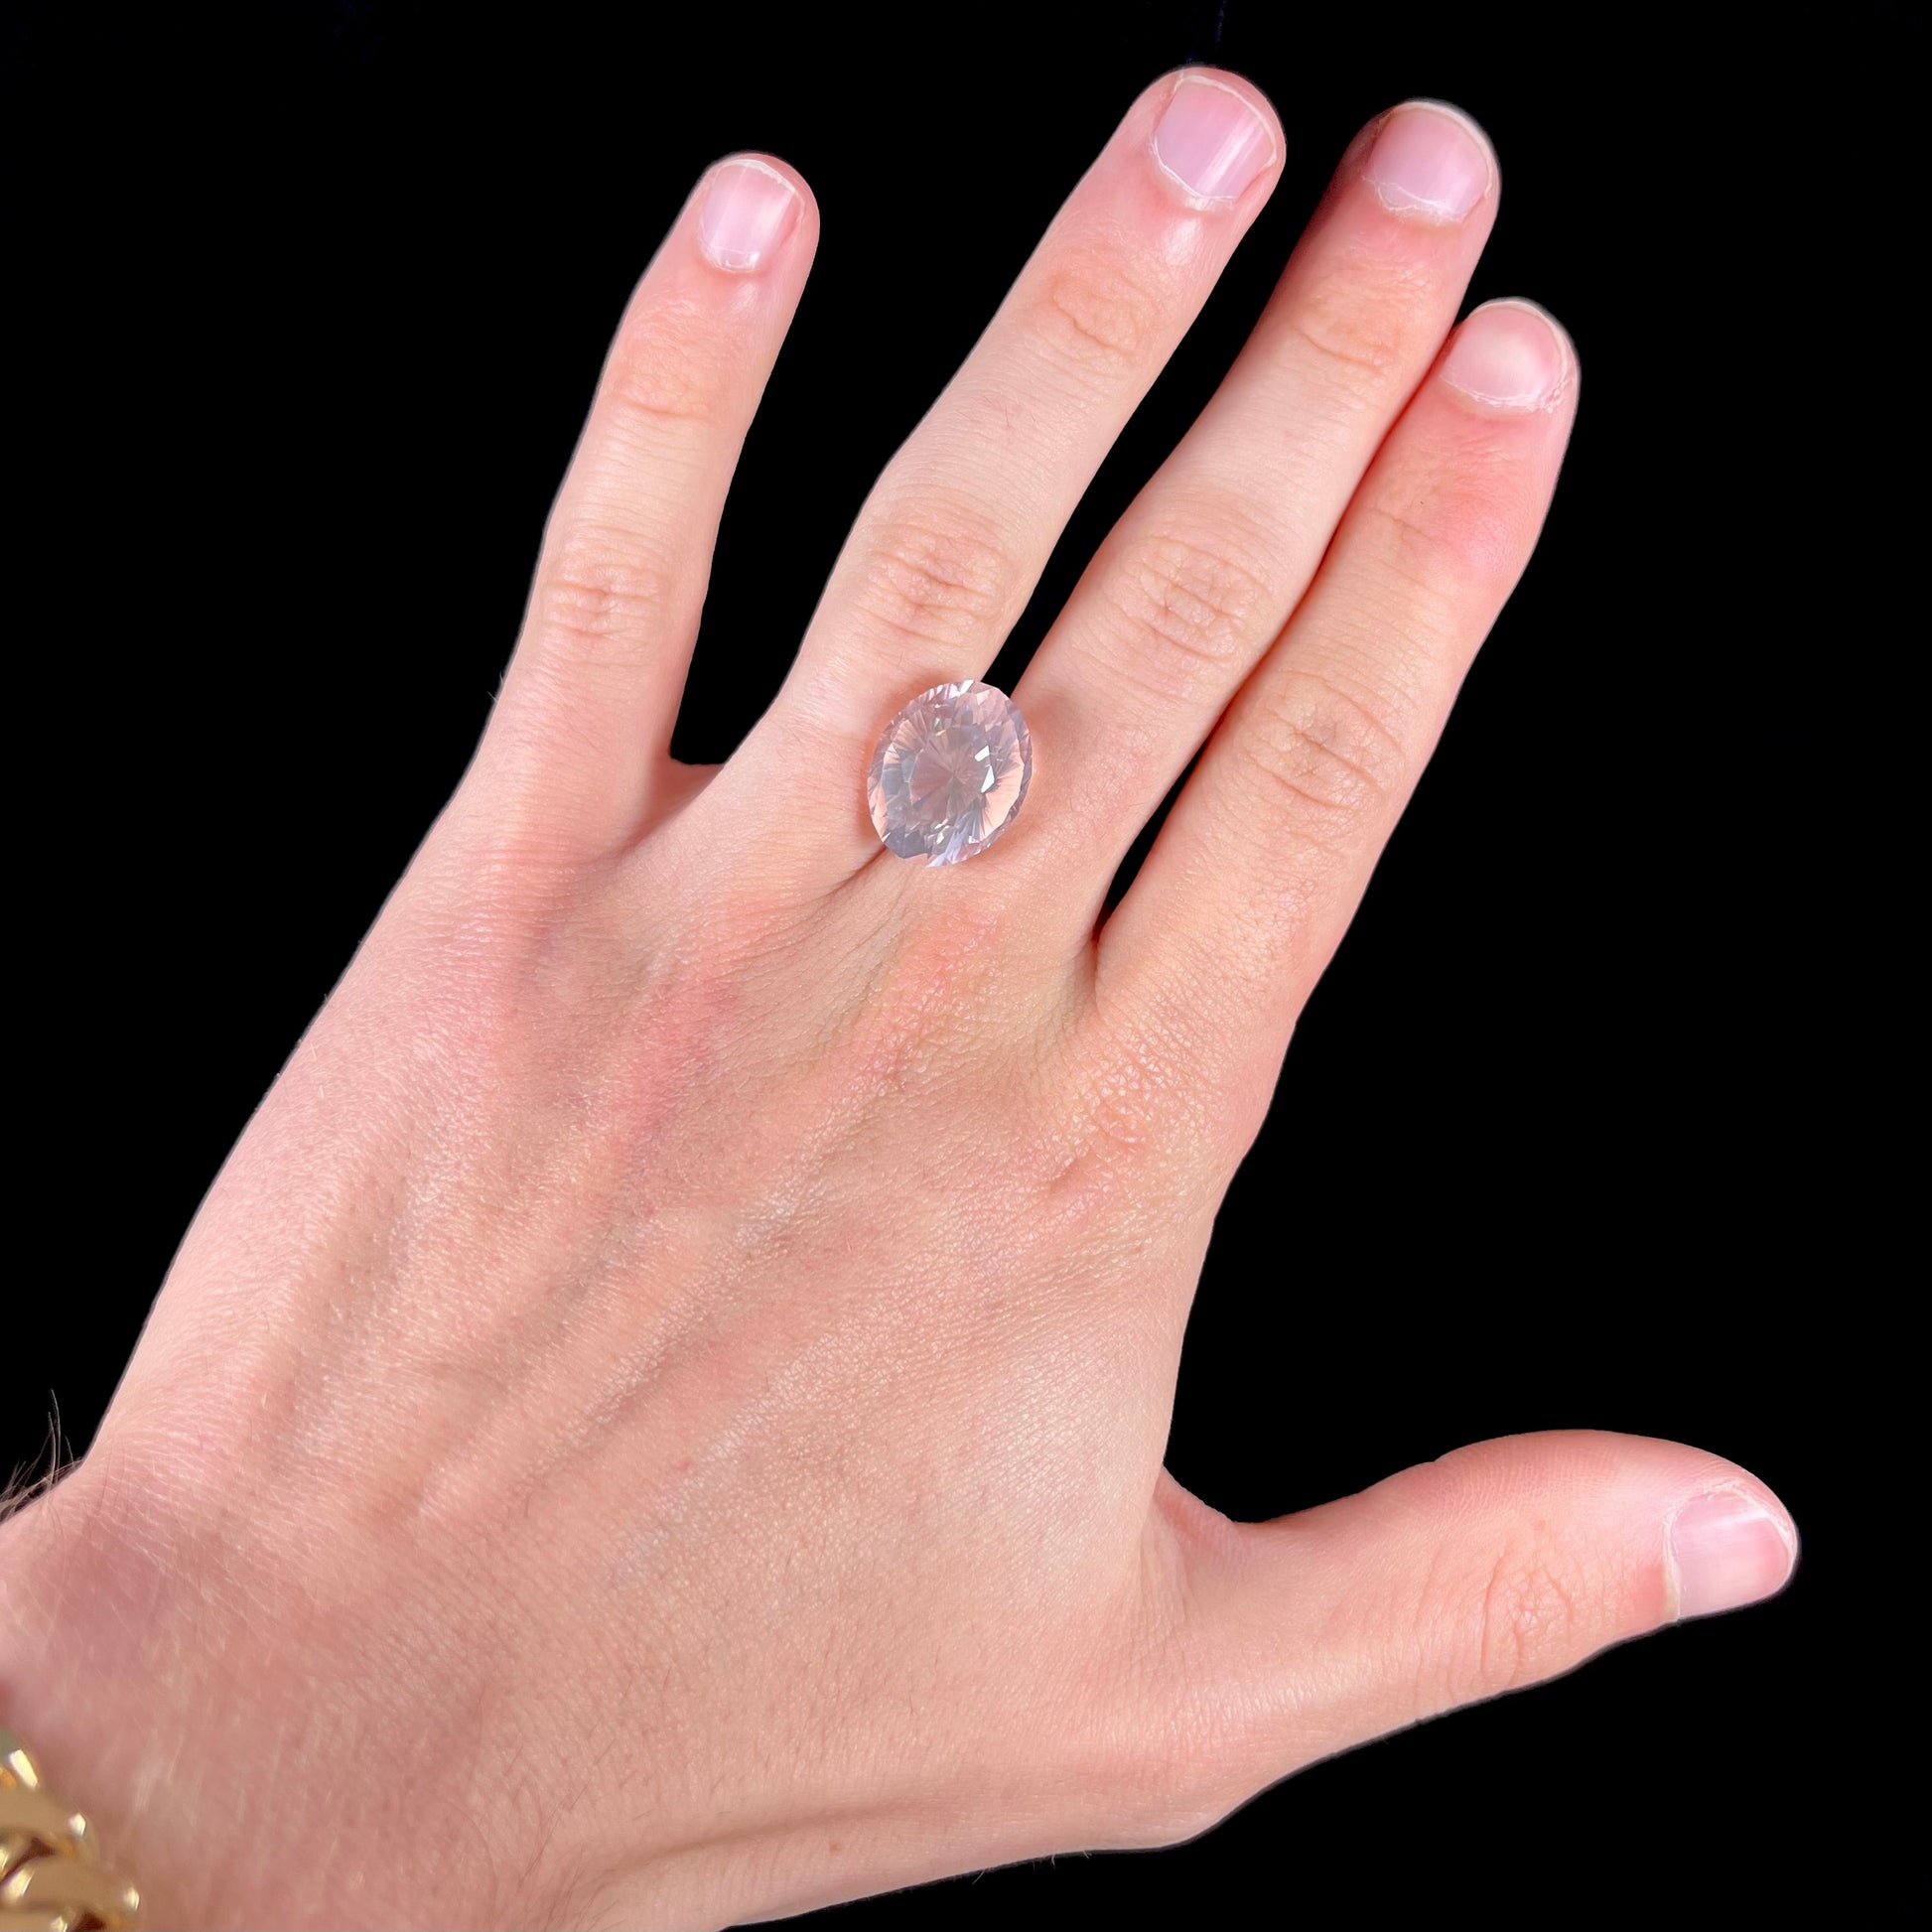 A loose, faceted oval cut rose quartz gemstone.  The stone is exceptionally clear.